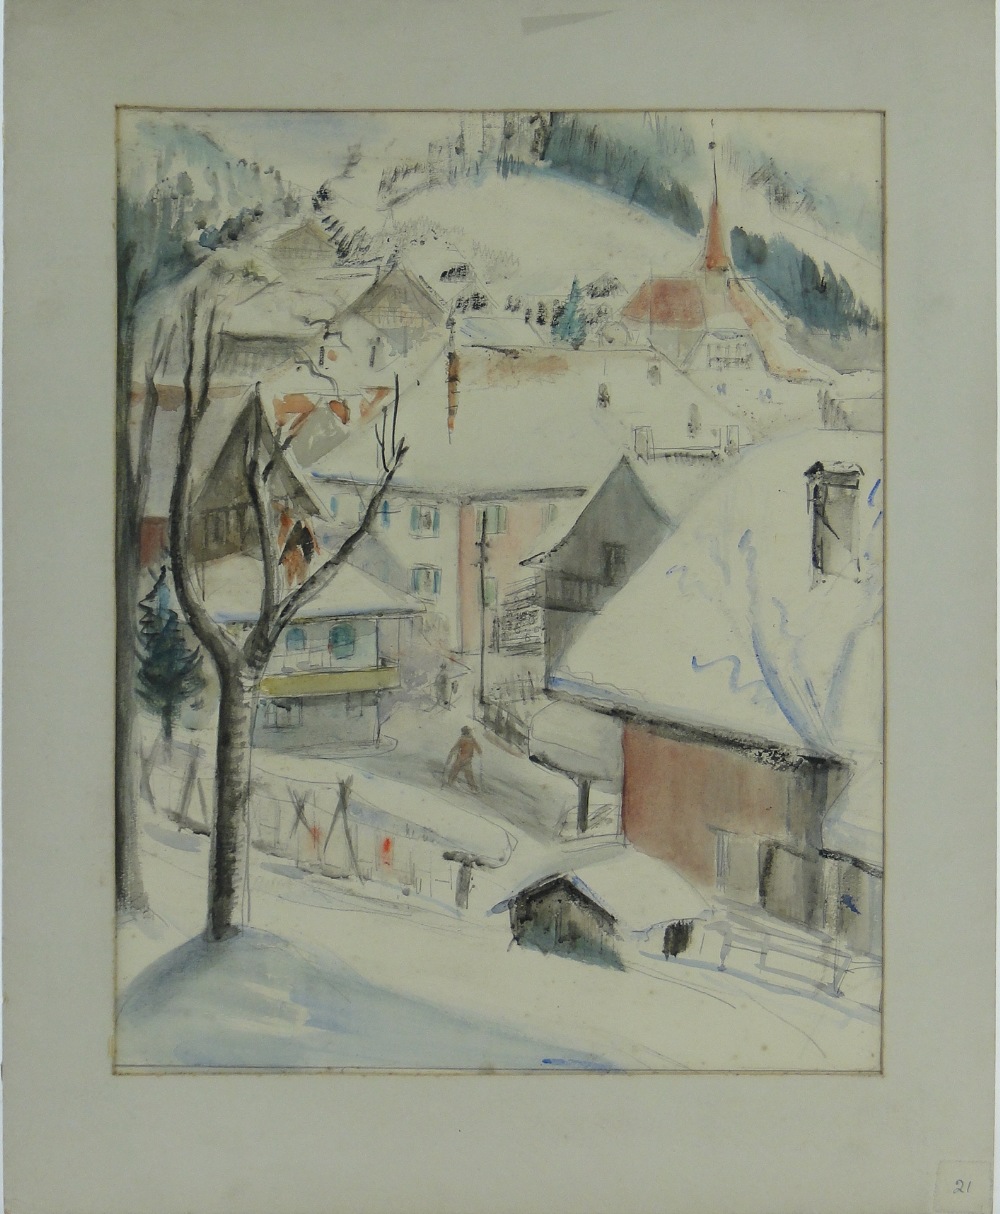 Sylvia St. George
watercolour, thaw in Chateau D'ex, 17" x 14", together with a pencil drawing by